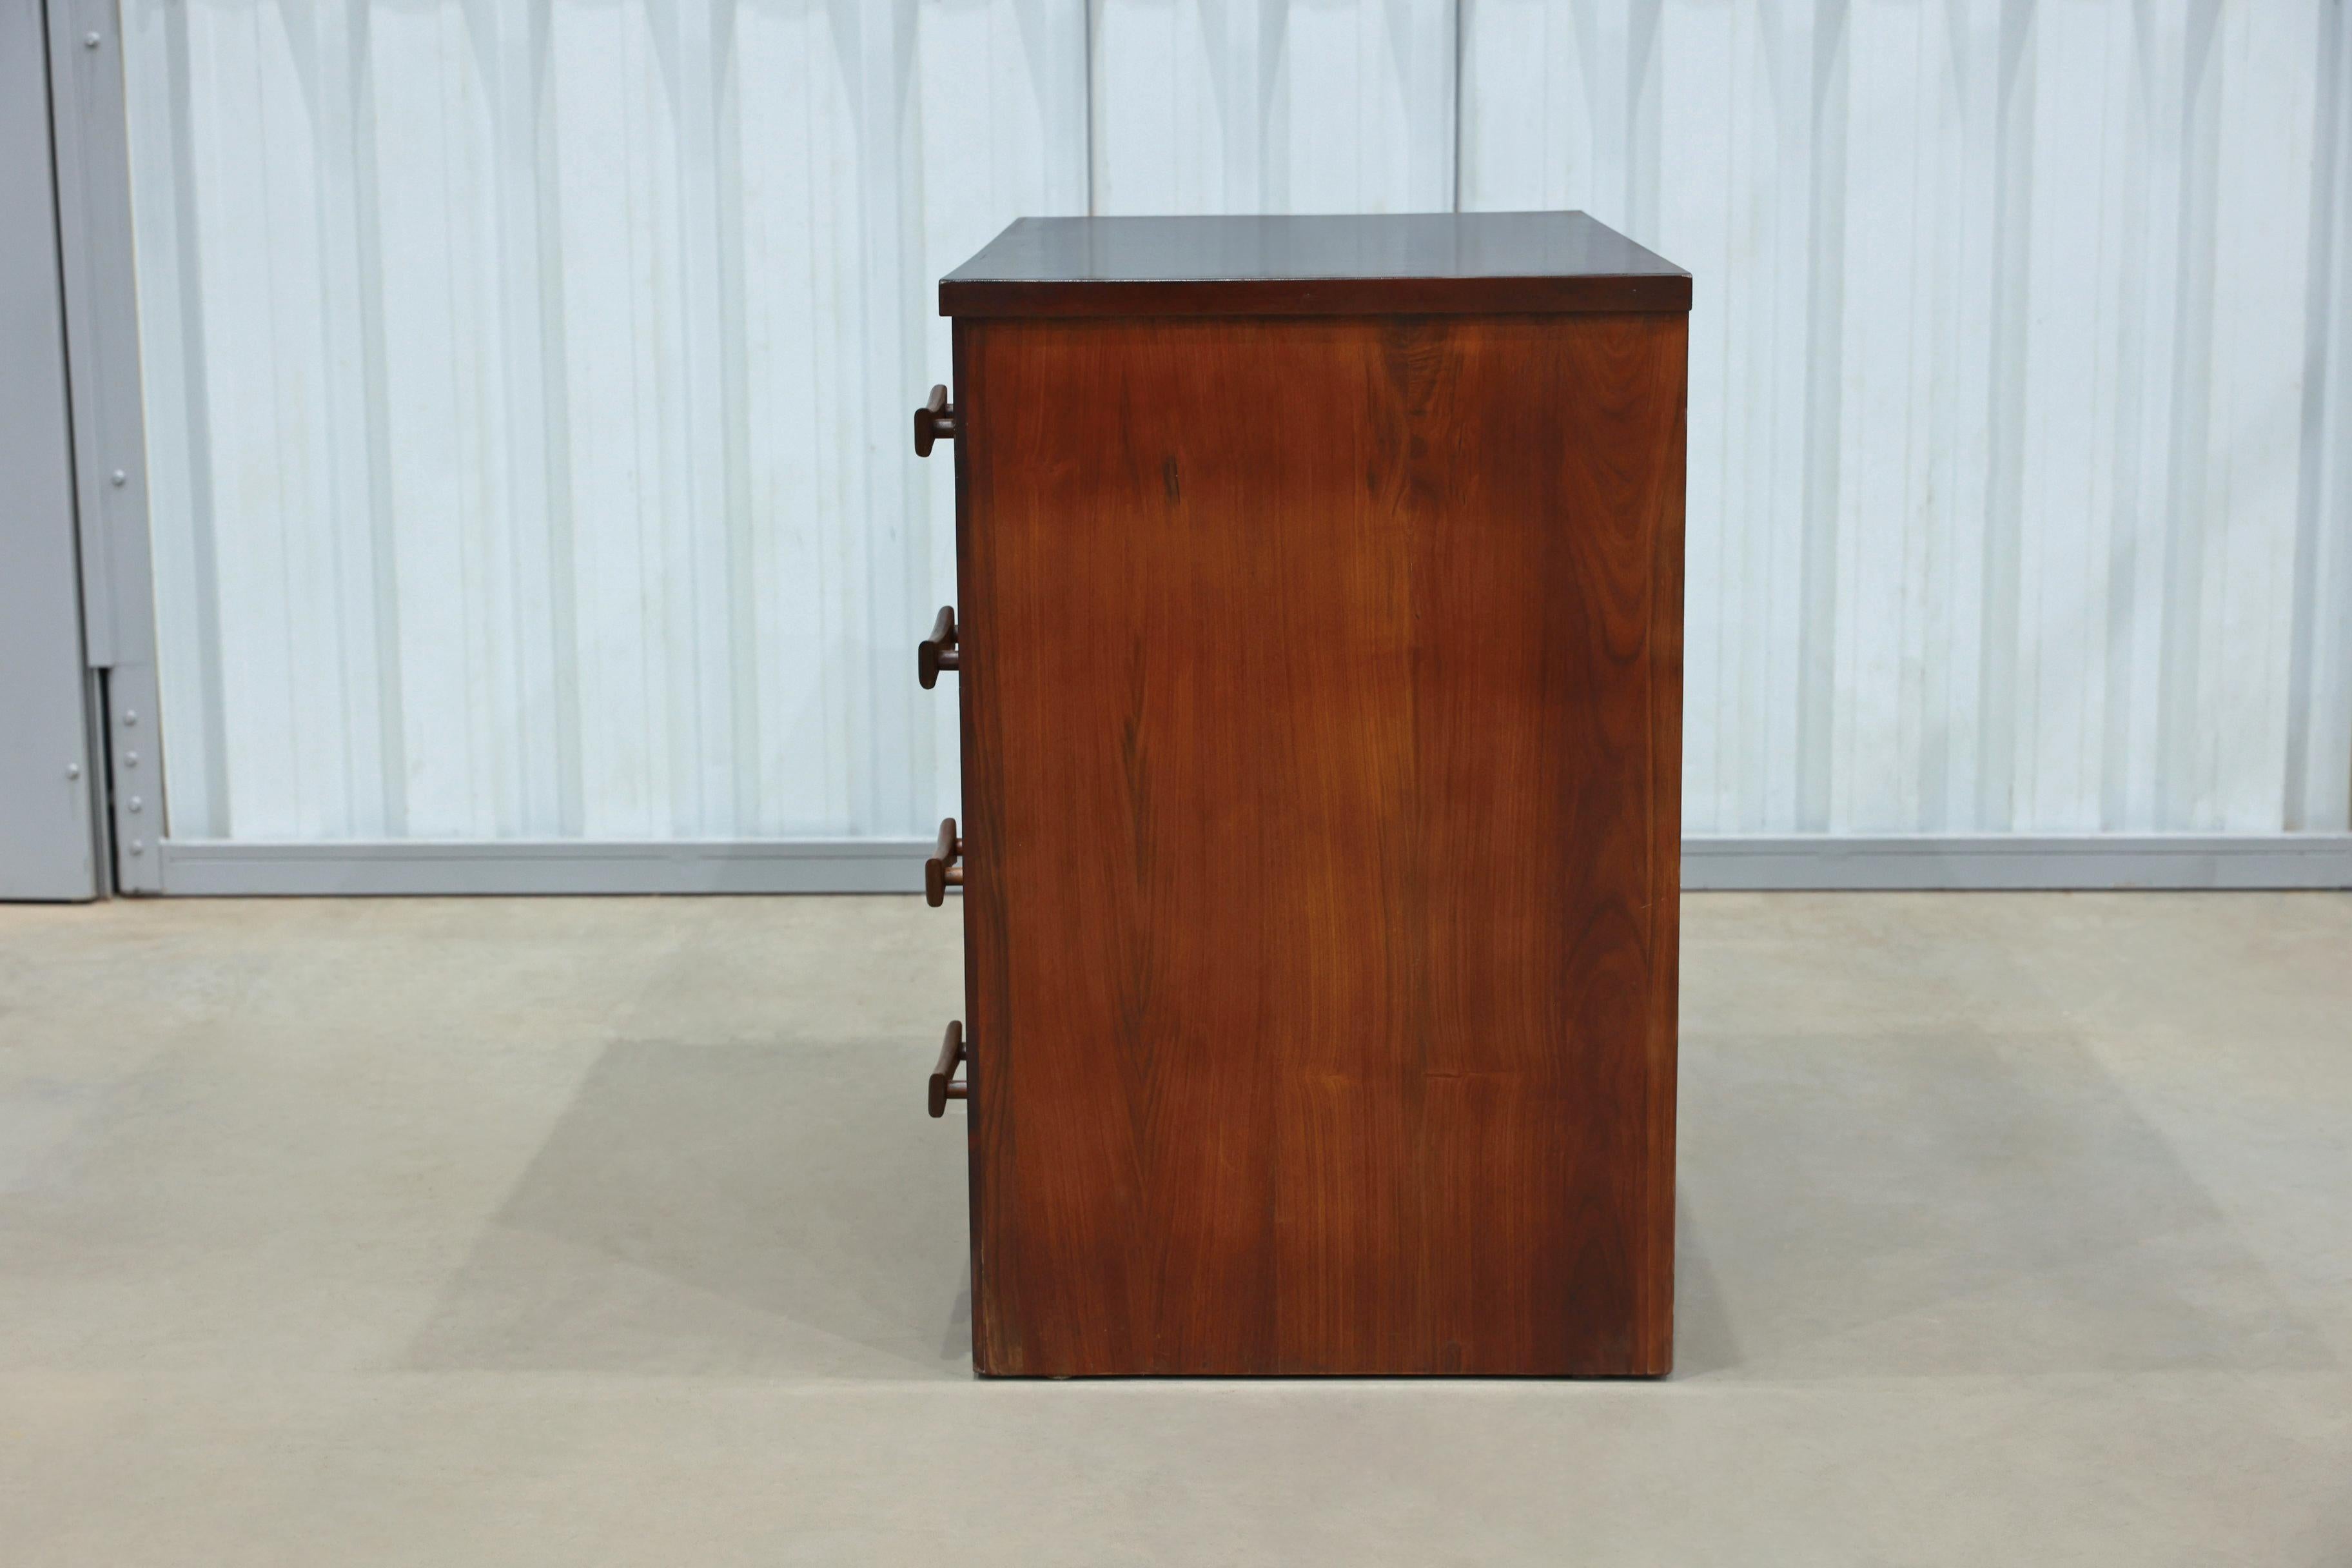 Hand-Carved Mid-Century Modern Chest of Drawers in Caviuna wood, Unknown, c. 1950 For Sale